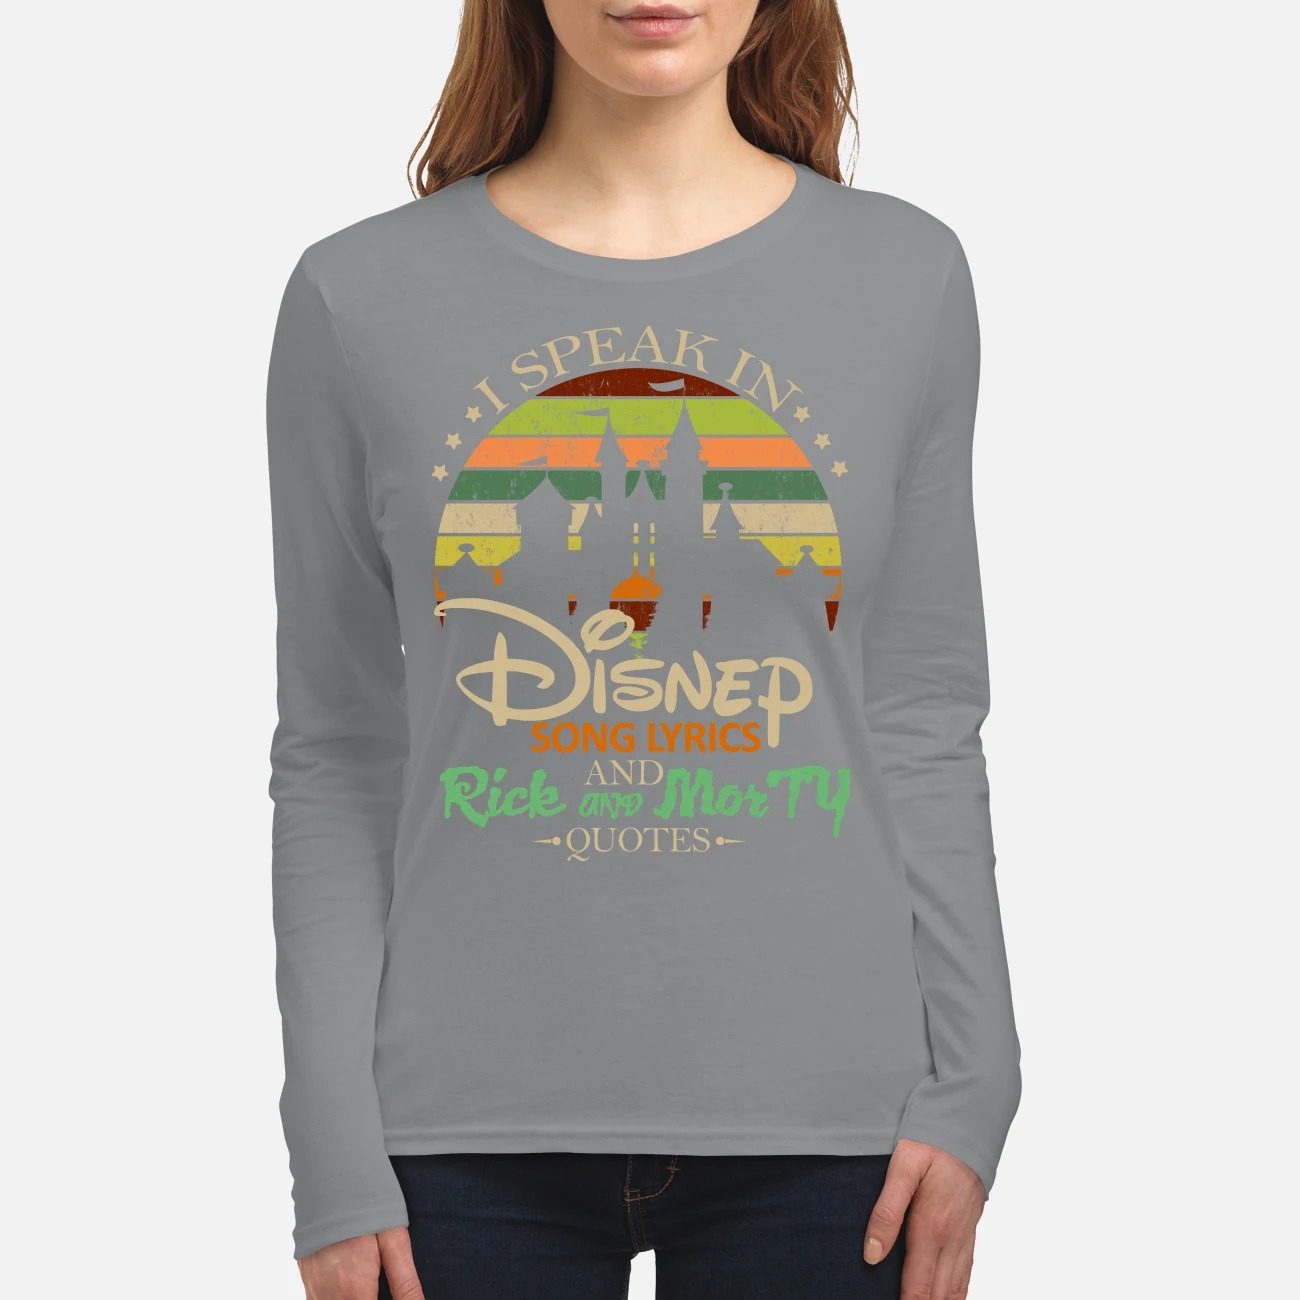 I speak in Disney song lyrics and Rick and Morty quotes women's long sleeved shirt